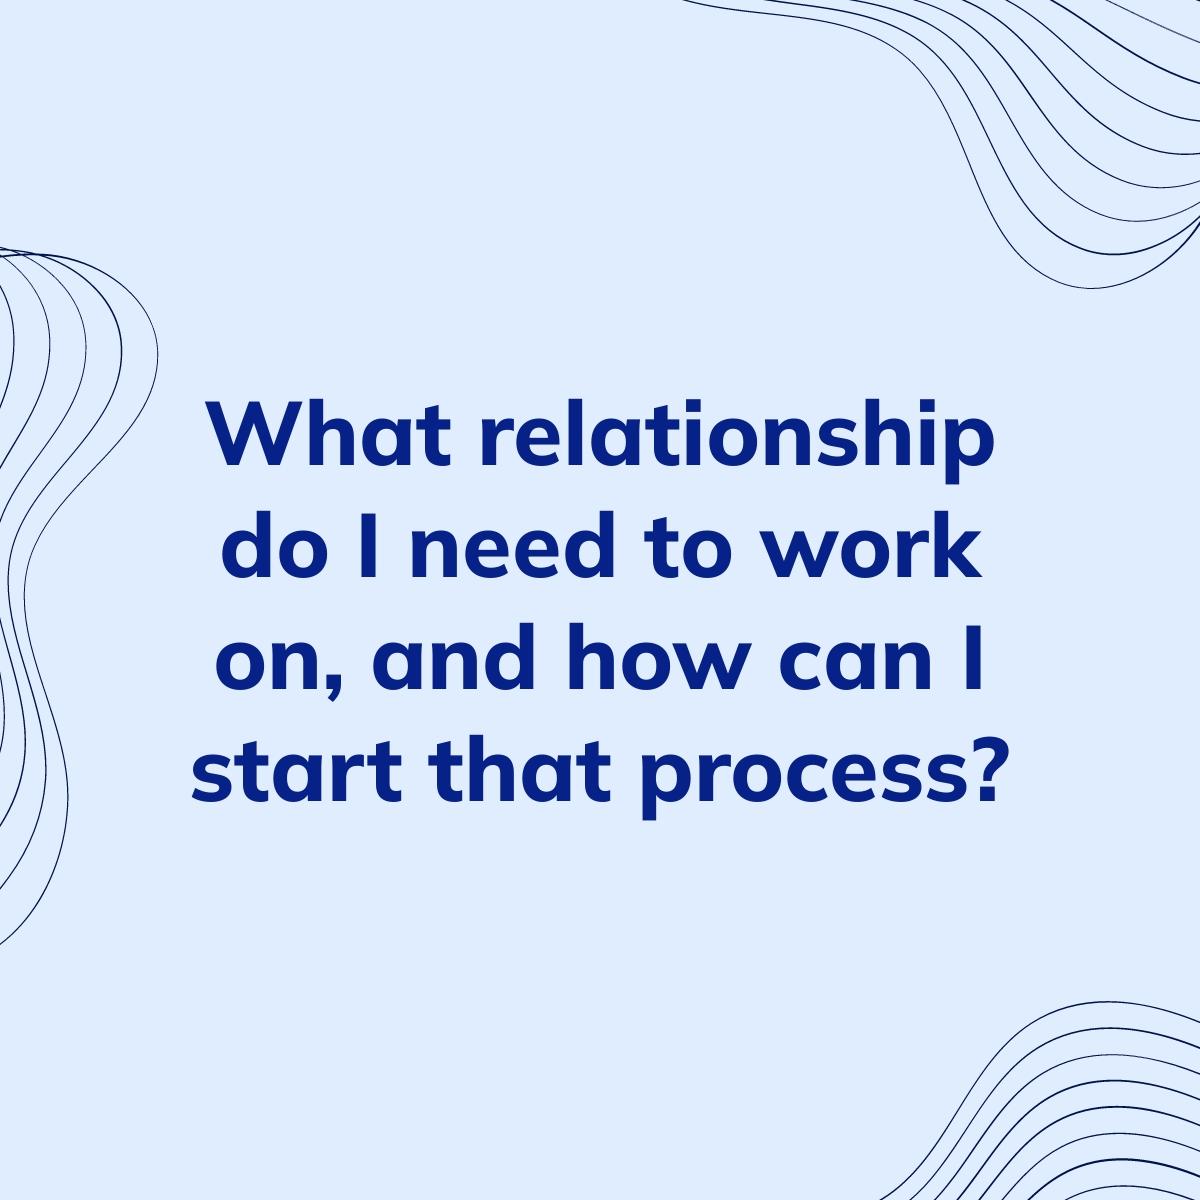 Journal Prompt: What relationship do I need to work on, and how can I start that process?